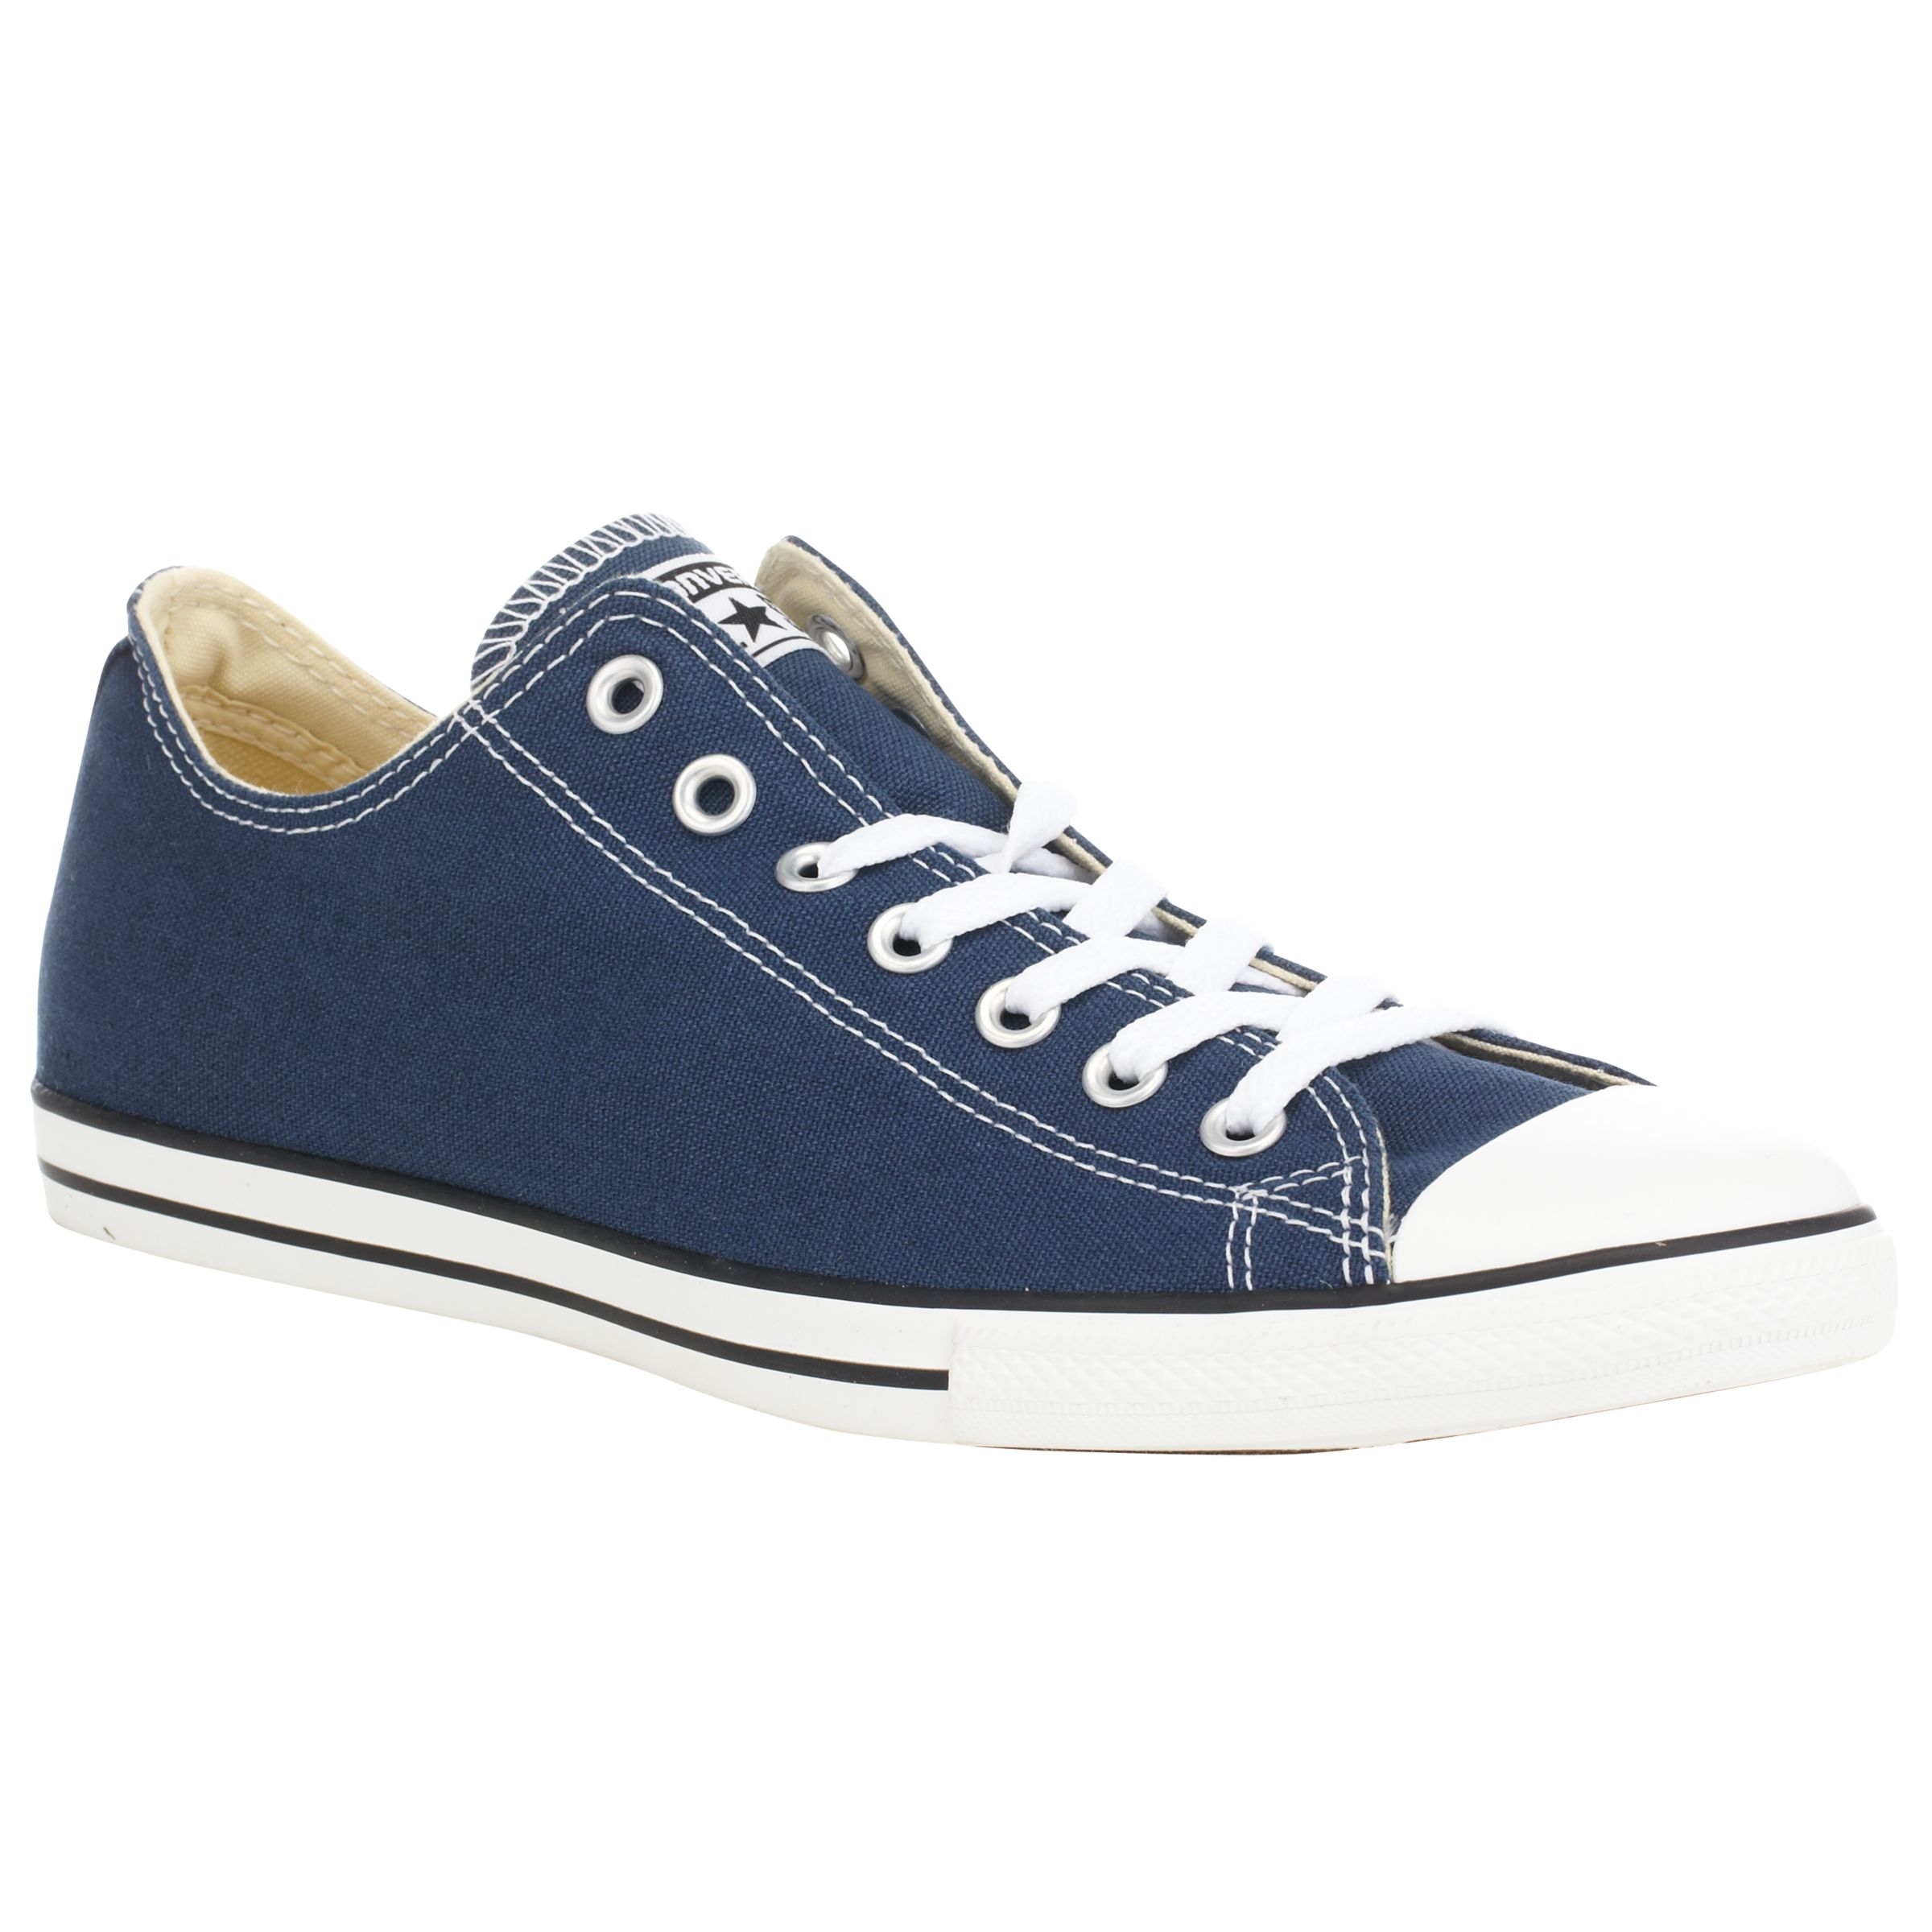 embotellamiento tierra Implacable Converse Lean All Star Ox Trainers